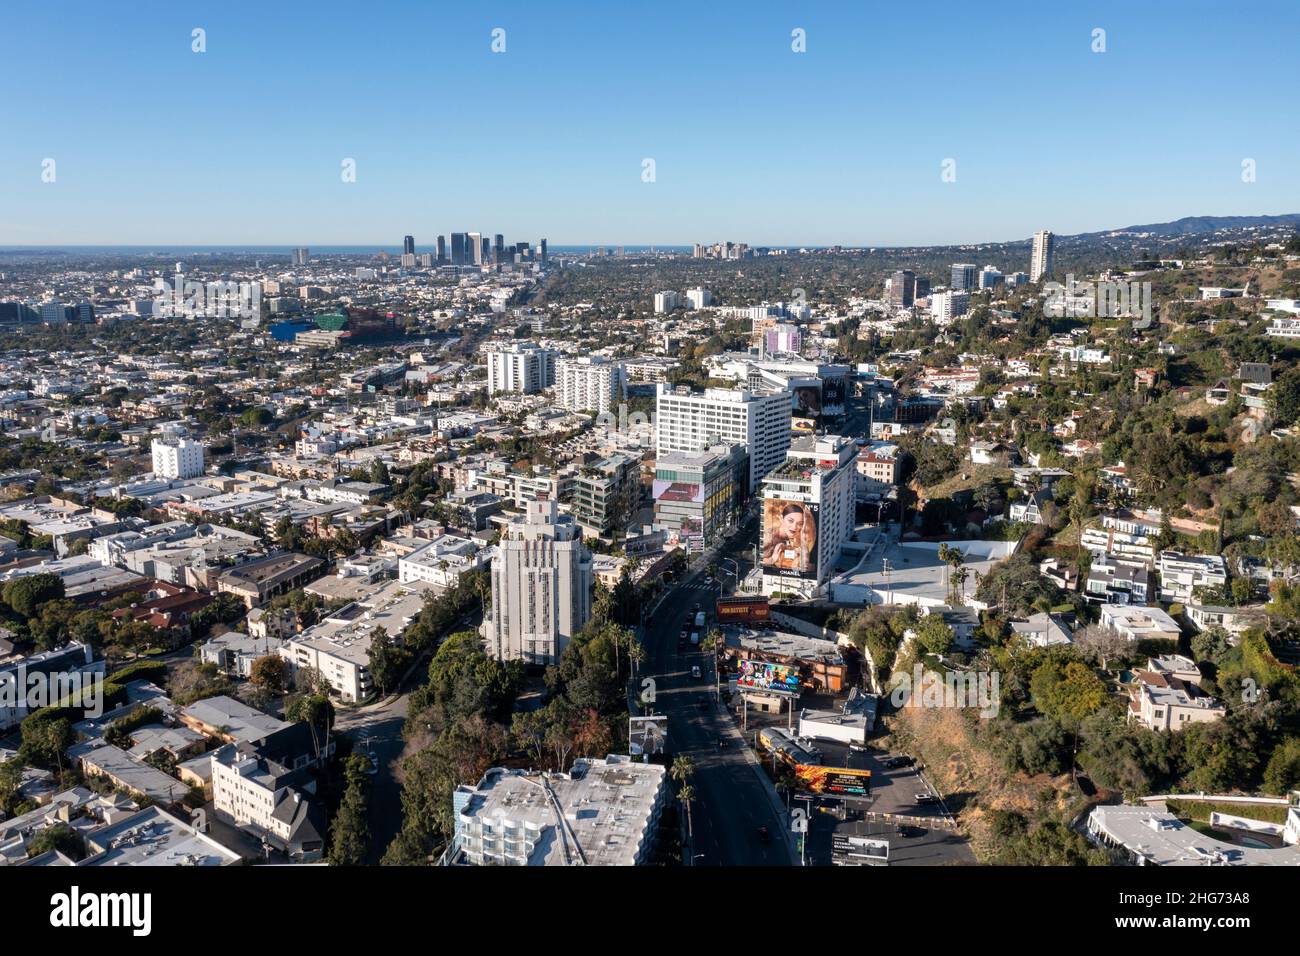 Aerial view of West Hollywood, the Sunset Strip and Los Angeles from the air on a clear day Stock Photo